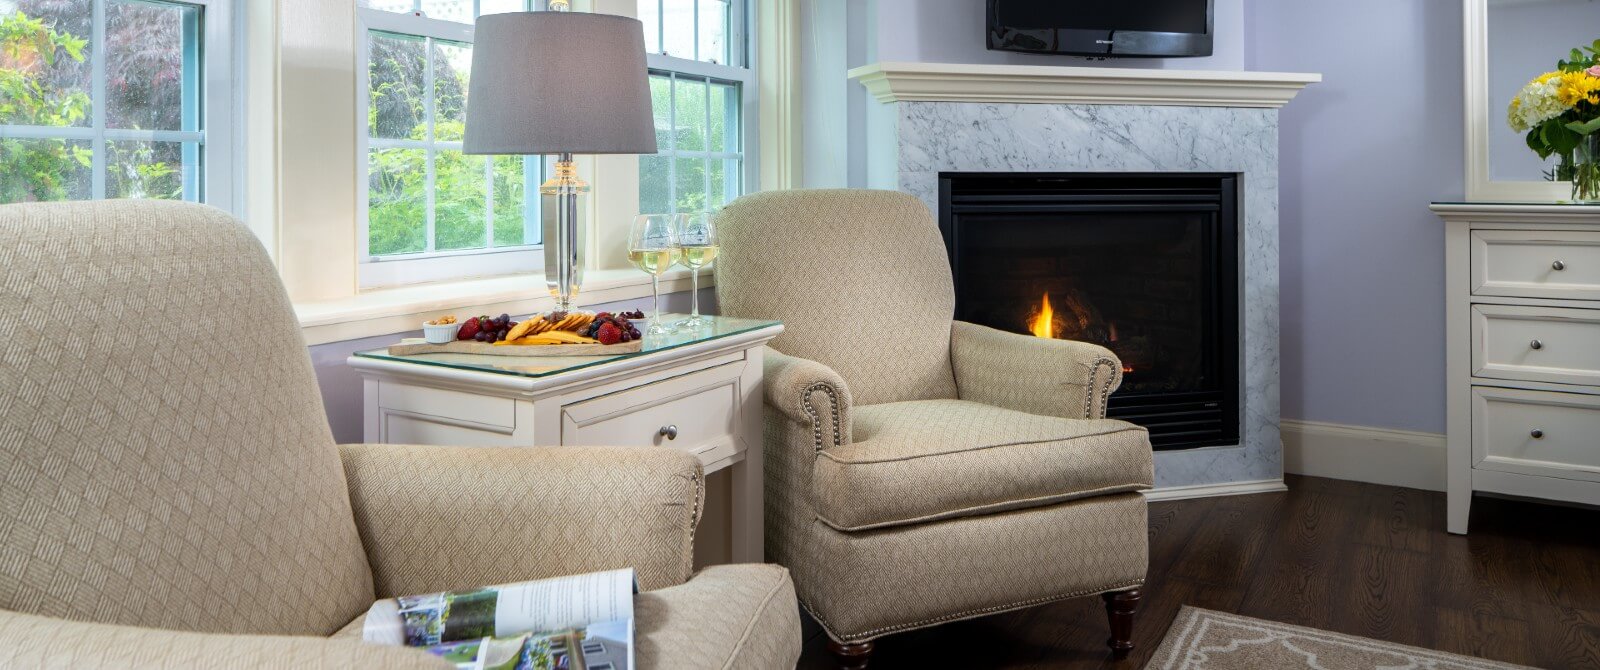 Two beige sitting chairs with table holding lamp and fruit tray next to a gas fireplace